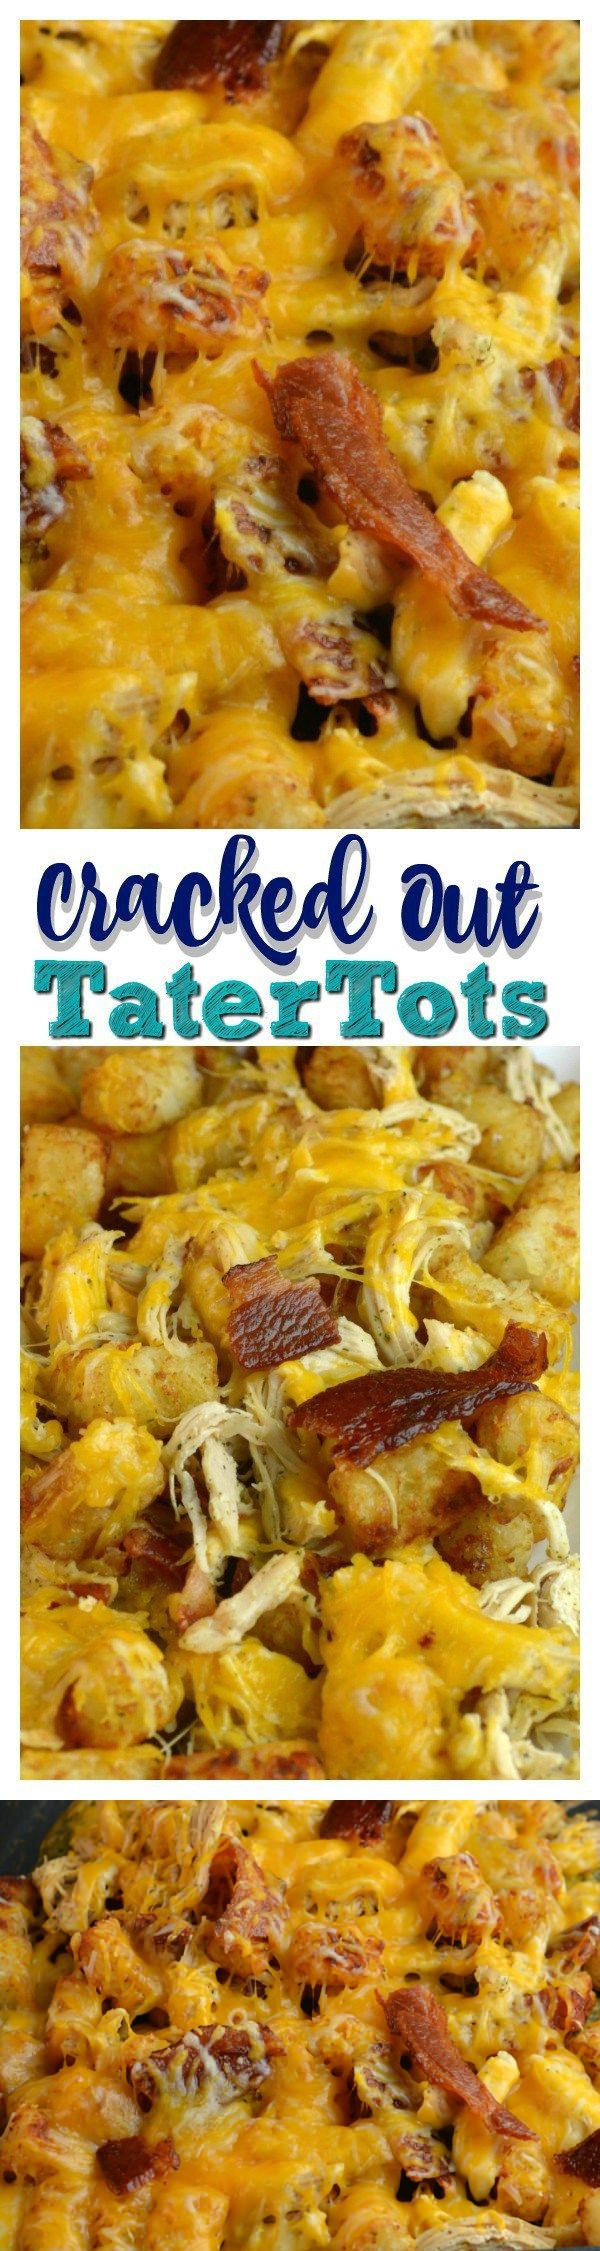 Cracked Up TatorTots with Instant Pot Ranch Chicken